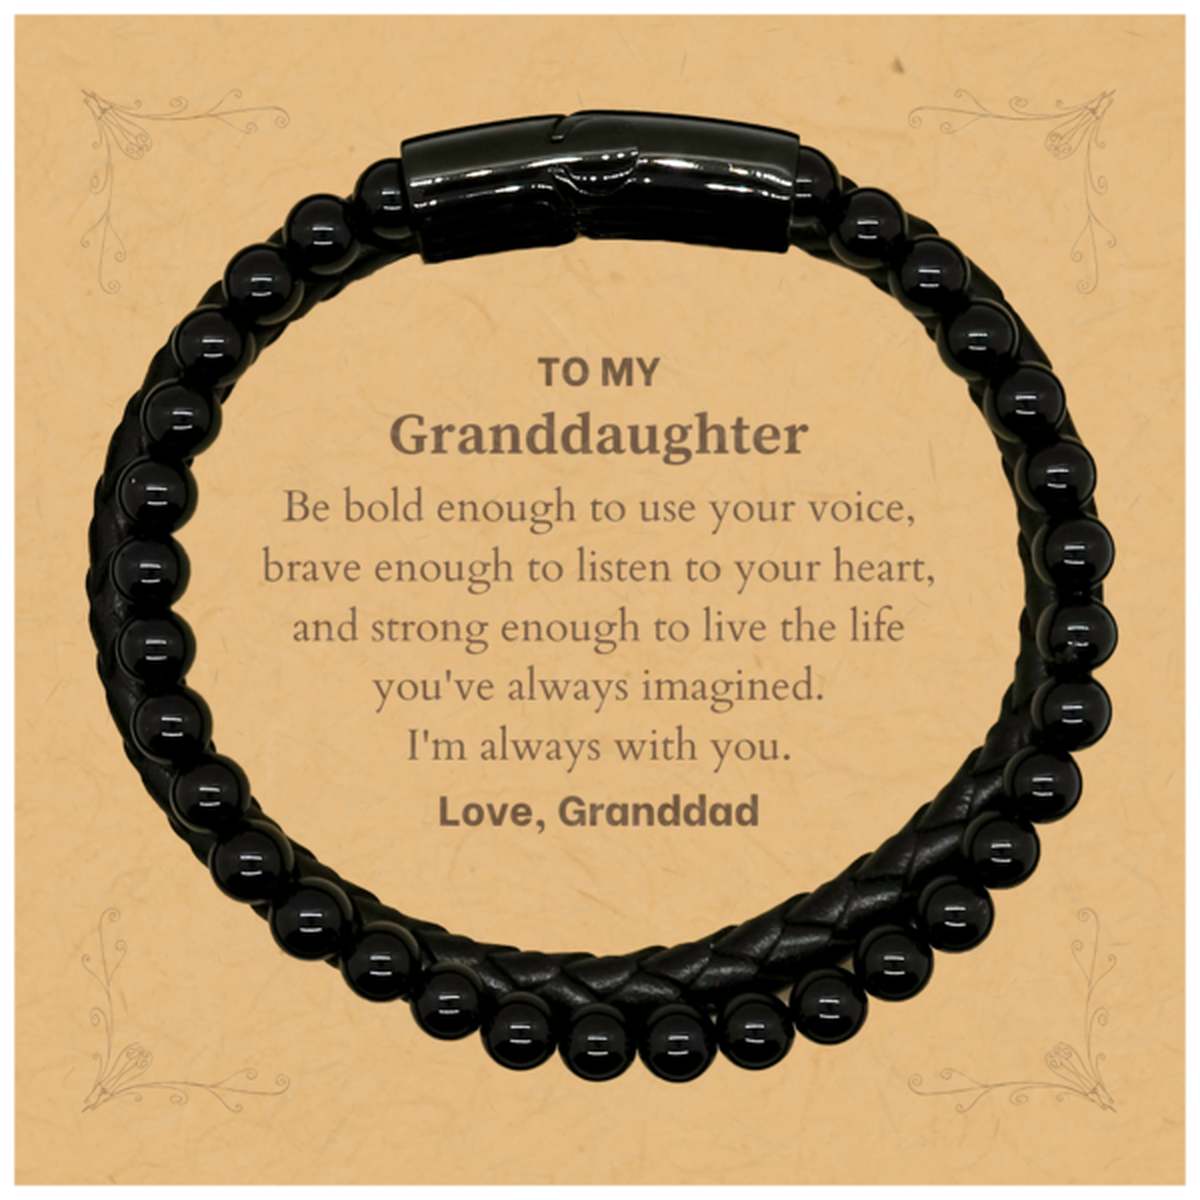 Keepsake Granddaughter Stone Leather Bracelets Gift Idea Graduation Christmas Birthday Granddaughter from Granddad, Granddaughter Be bold enough to use your voice, brave enough to listen to your heart. Love, Granddad